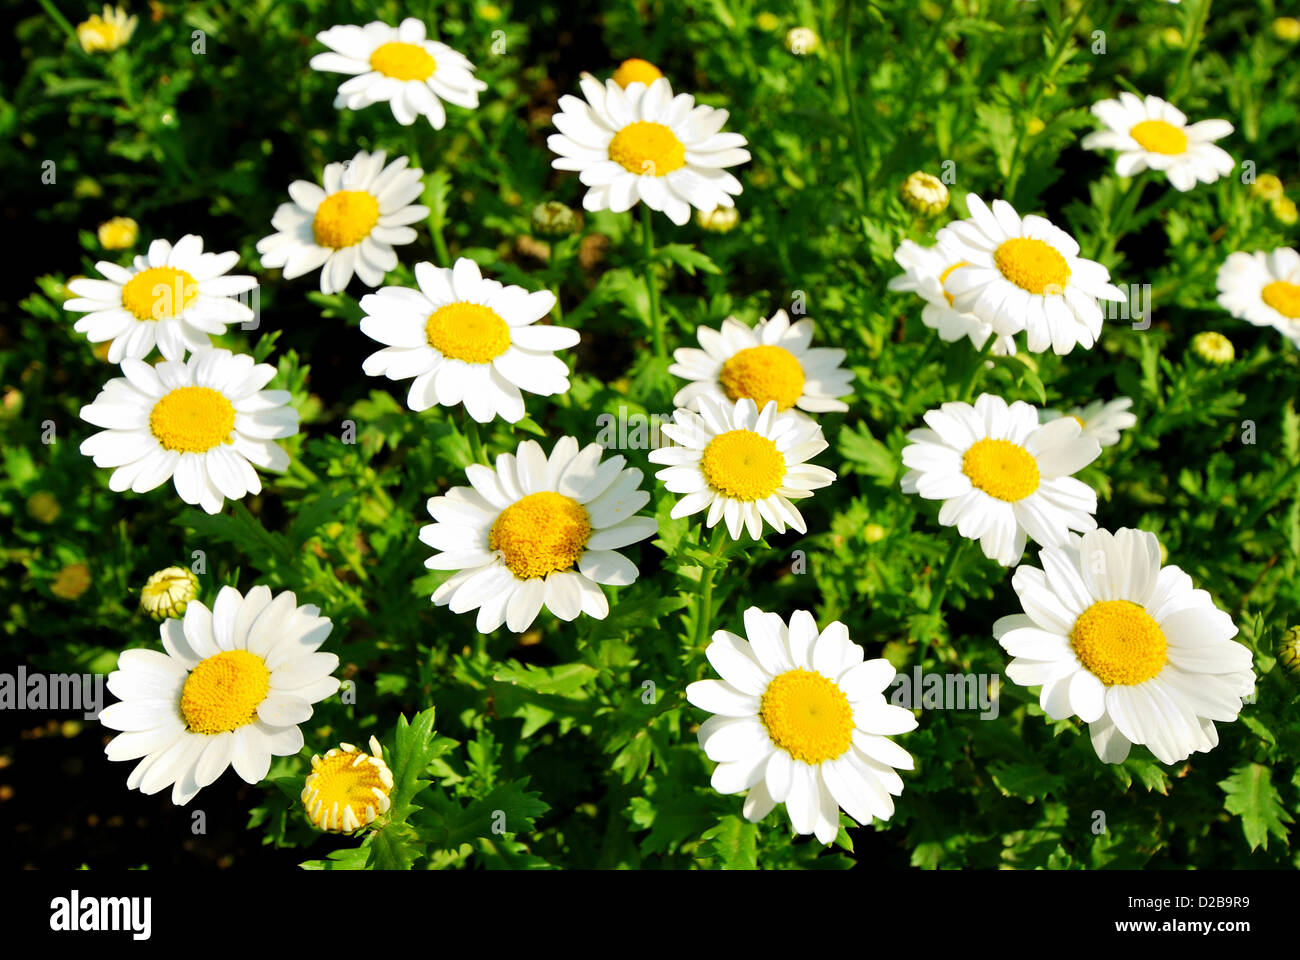 Beautiful cluster of white daisy flower in the open field, Shanghai, China. Stock Photo